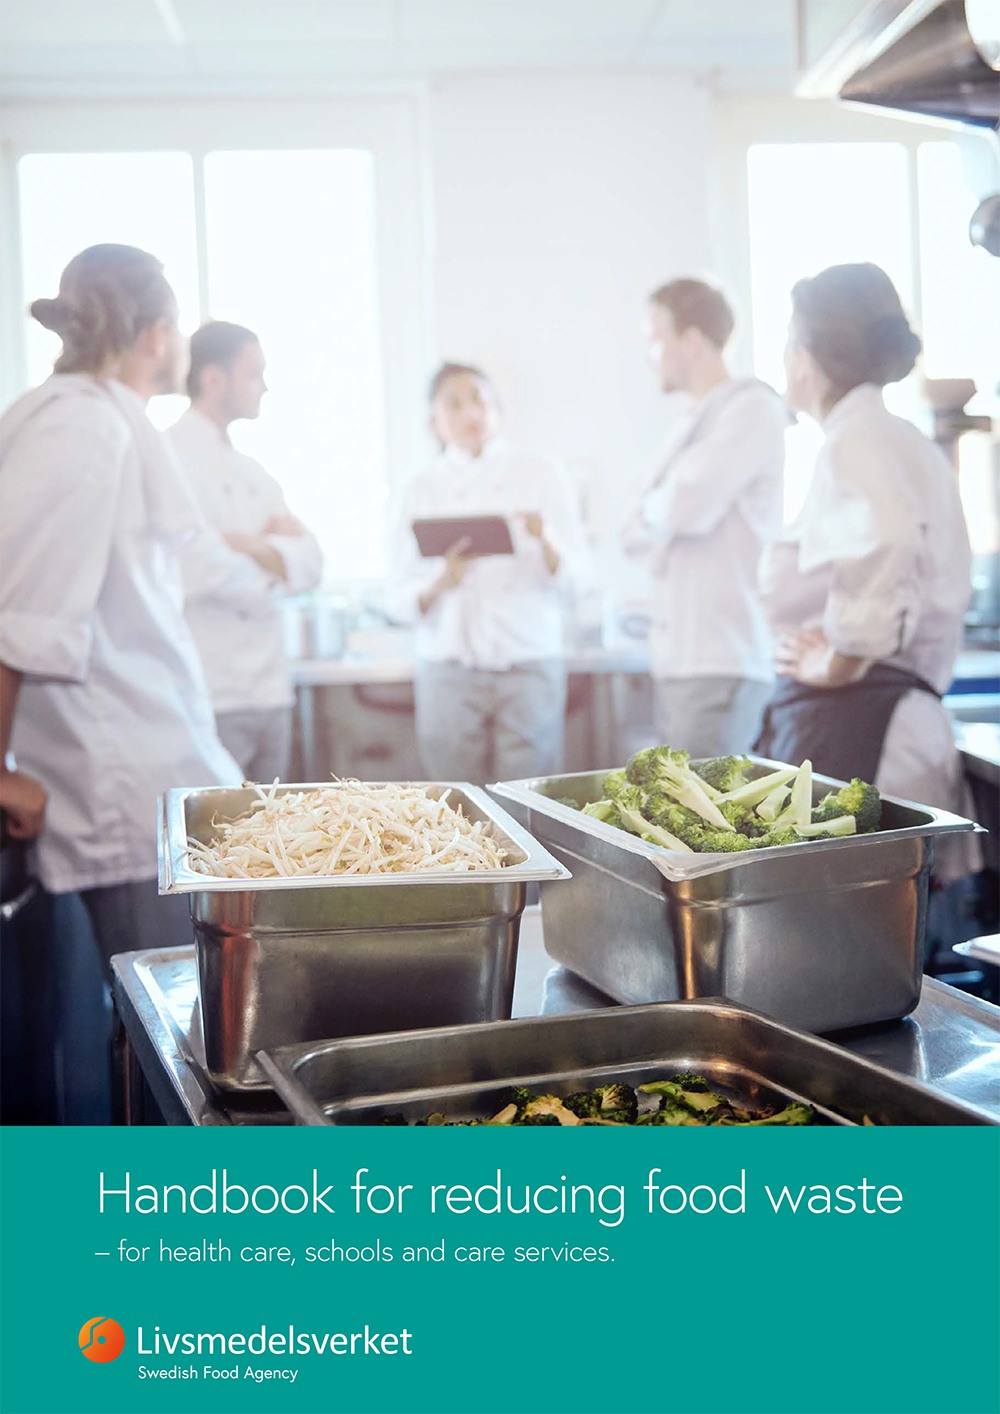 Frontpage of Handbook for reducing food waste.